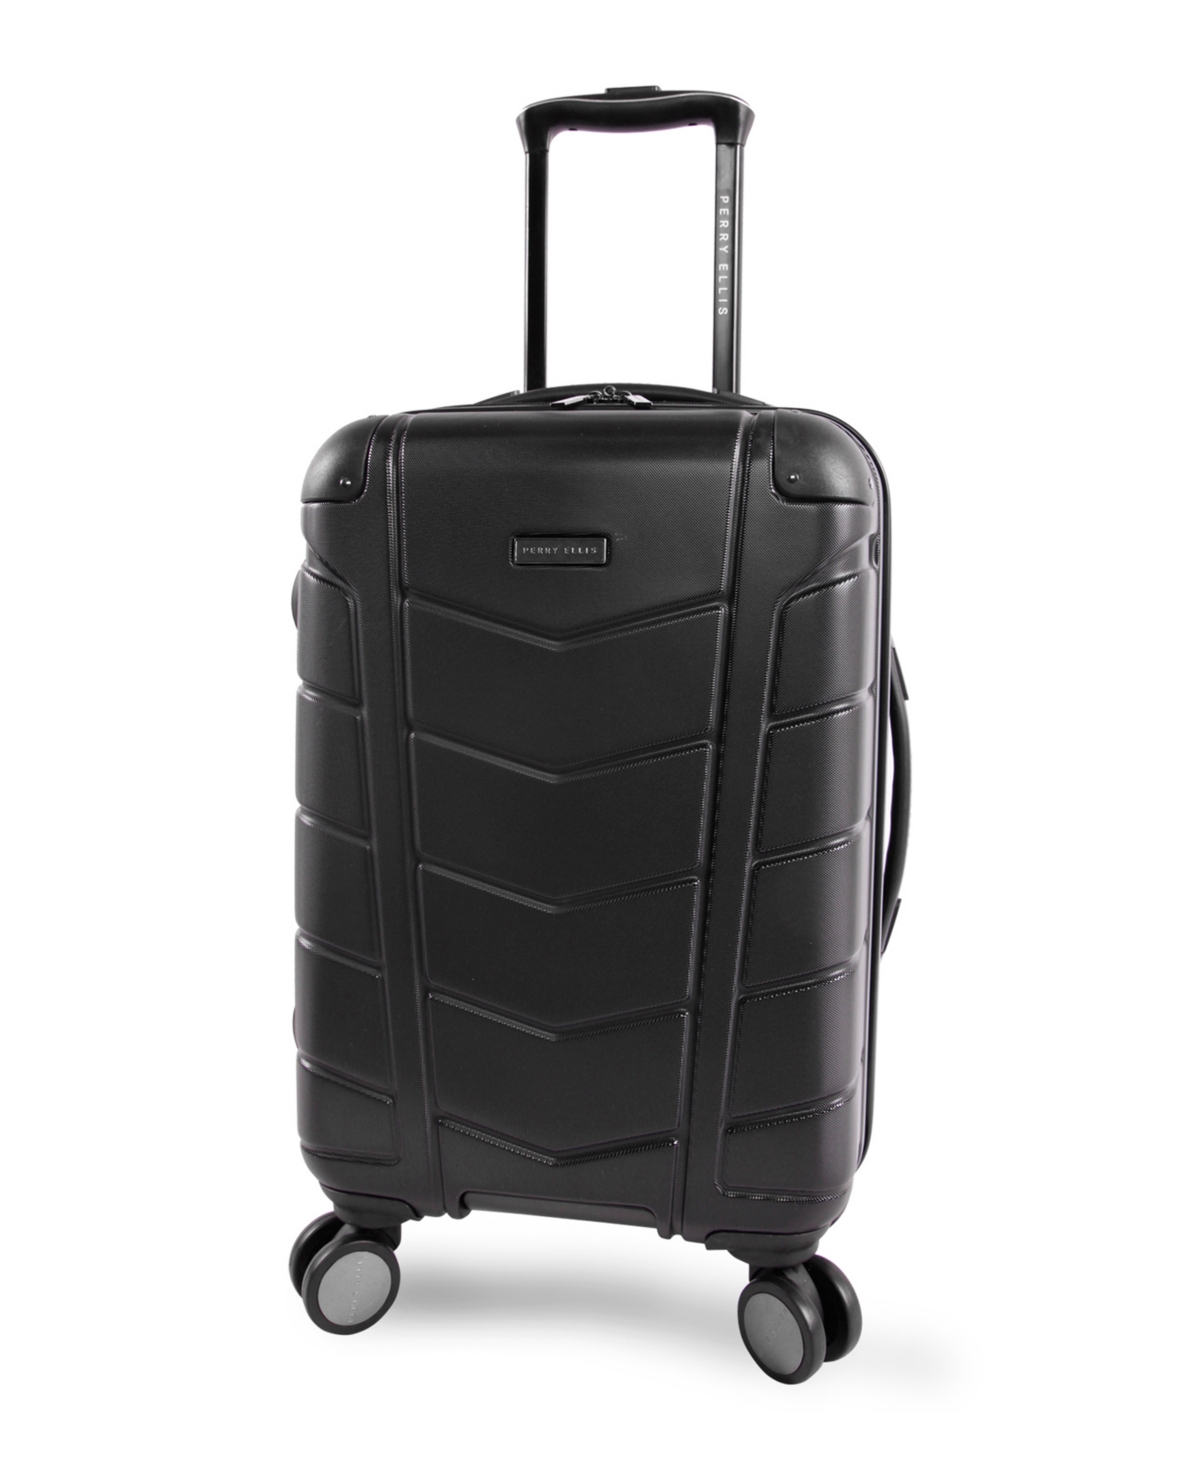 Tanner 21" Spinner Luggage - Charcoal